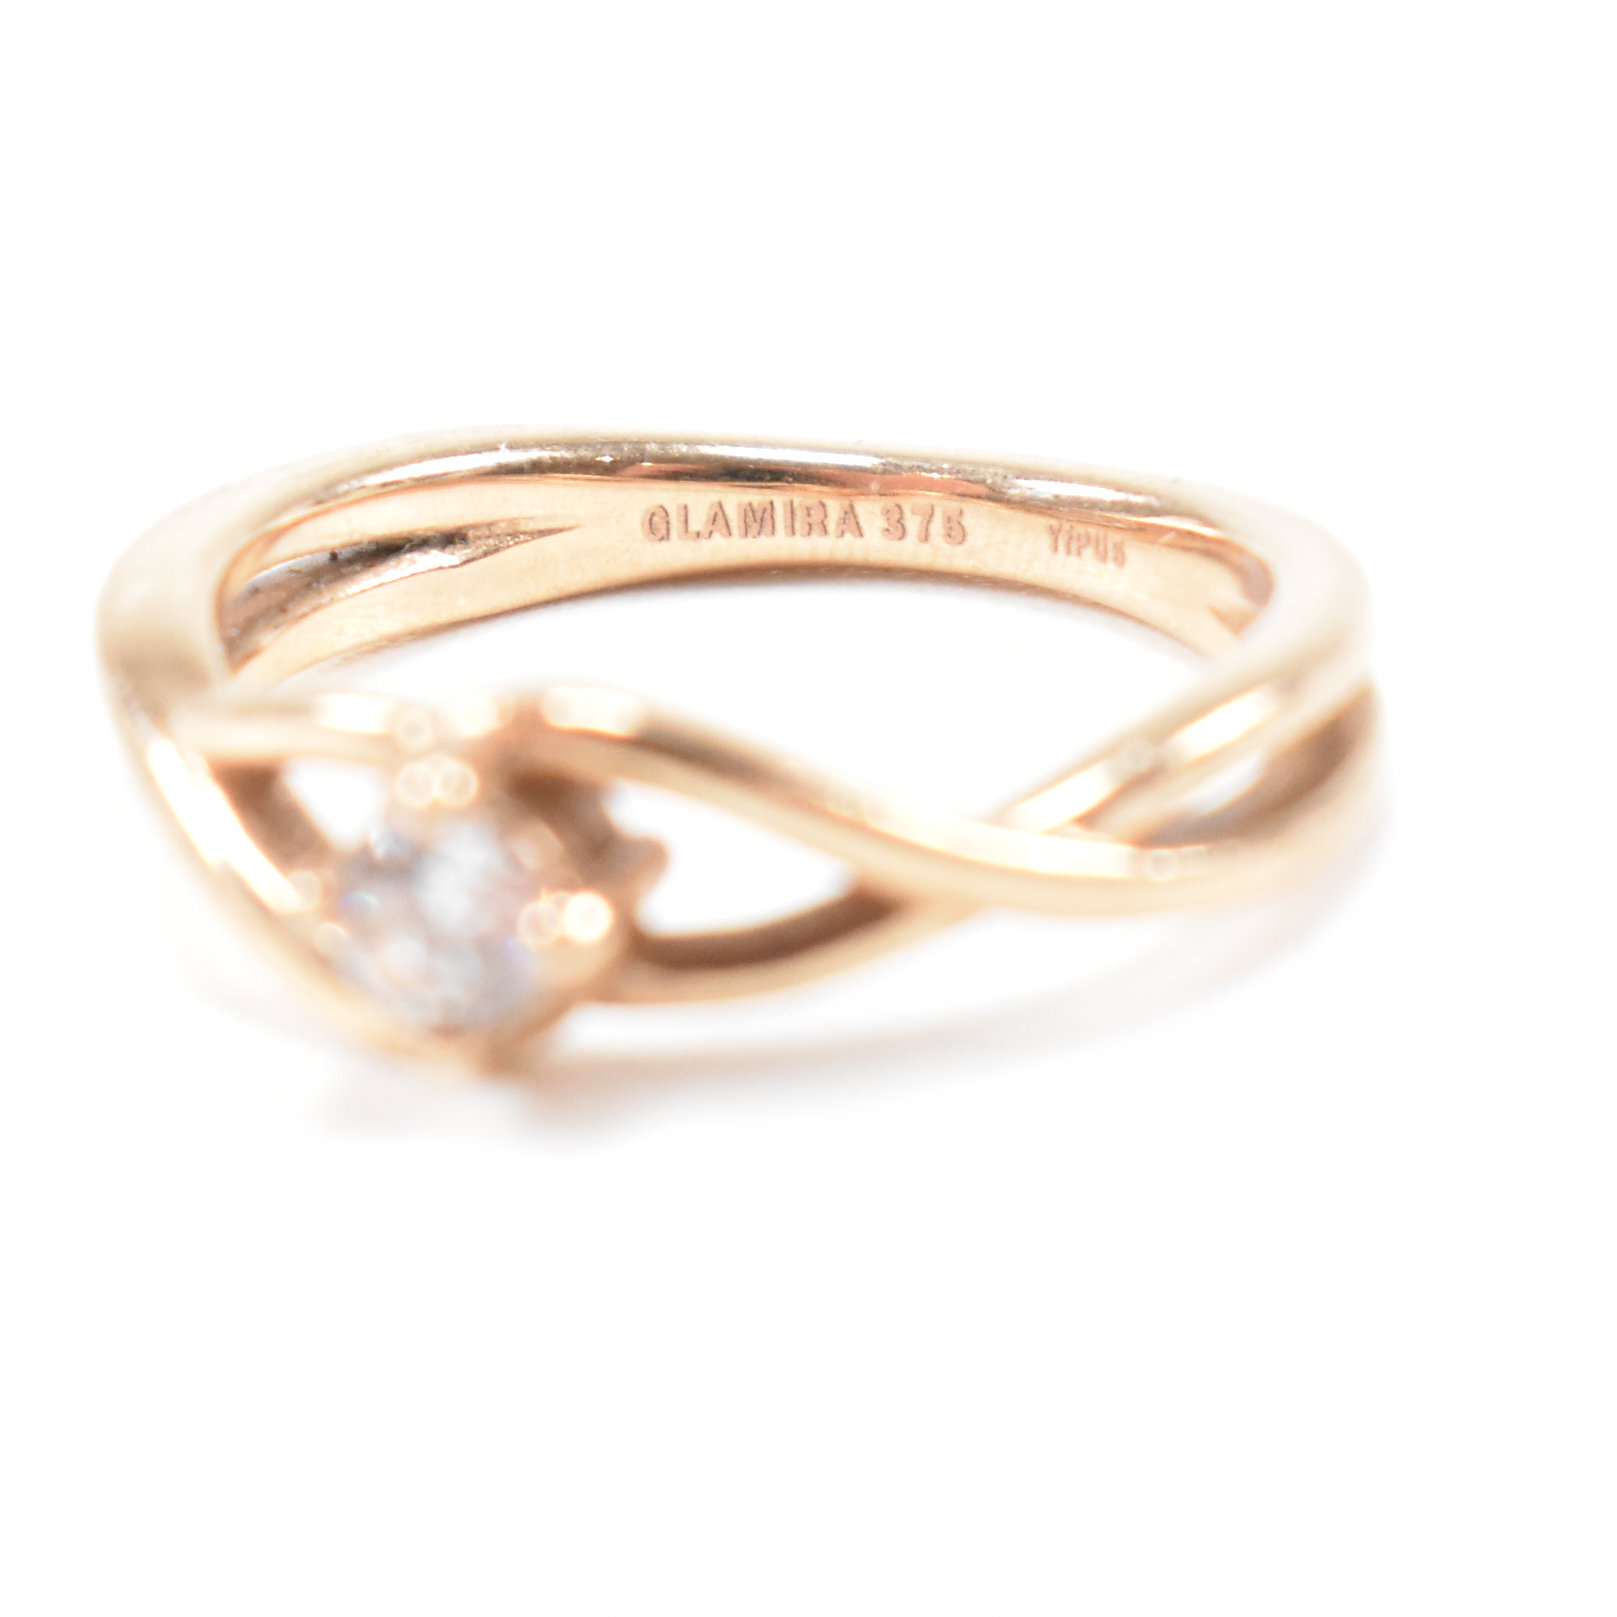 HALLMARKED 9CT ROSE GOLD & WHITE STONE SOLITAIRE CROSSOVER RING - Image 8 of 9